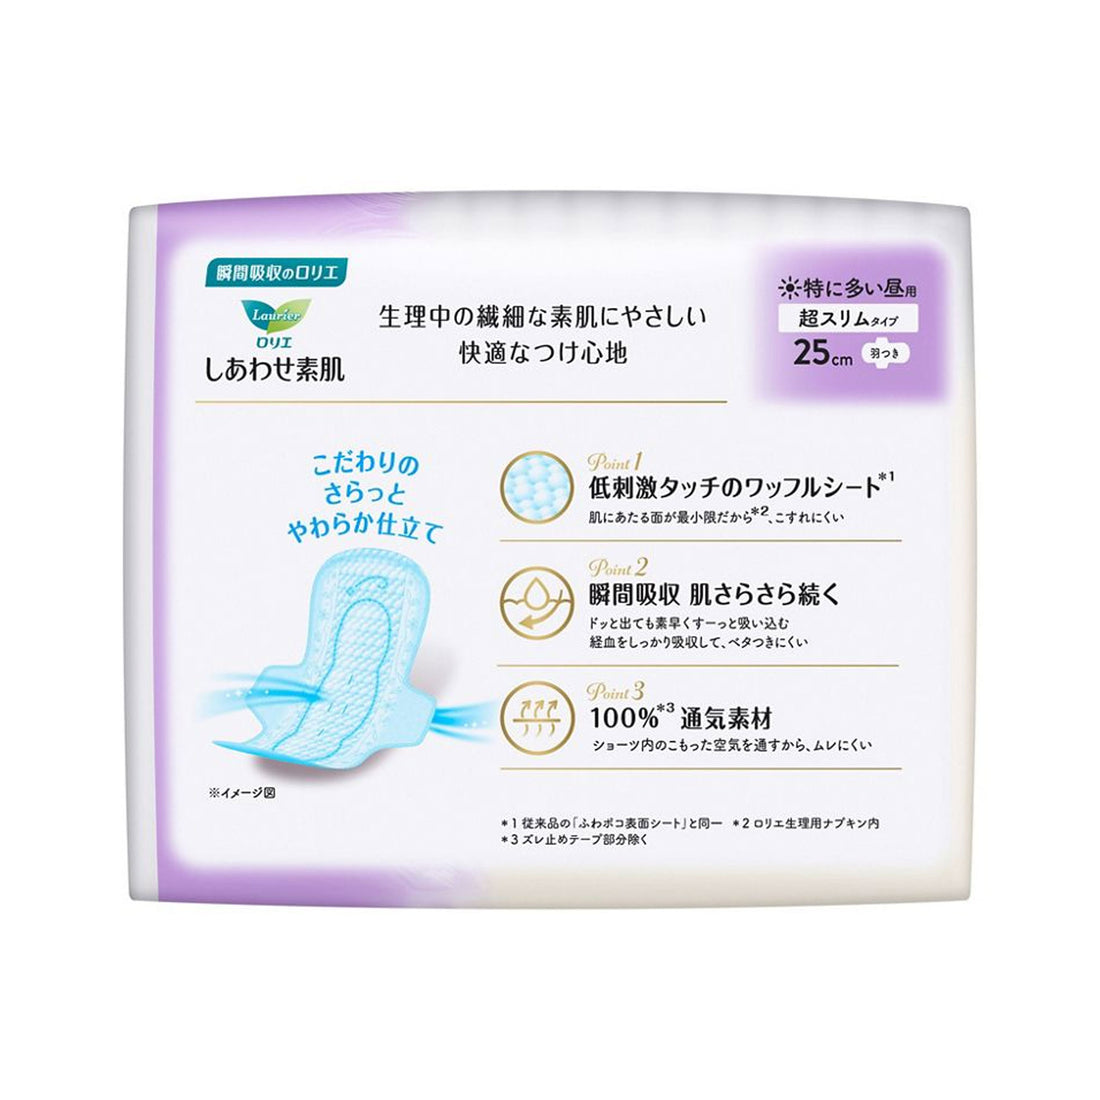 KAO Laurier F Happy Feminine Pads Thin 25cm with Wings 17pcs